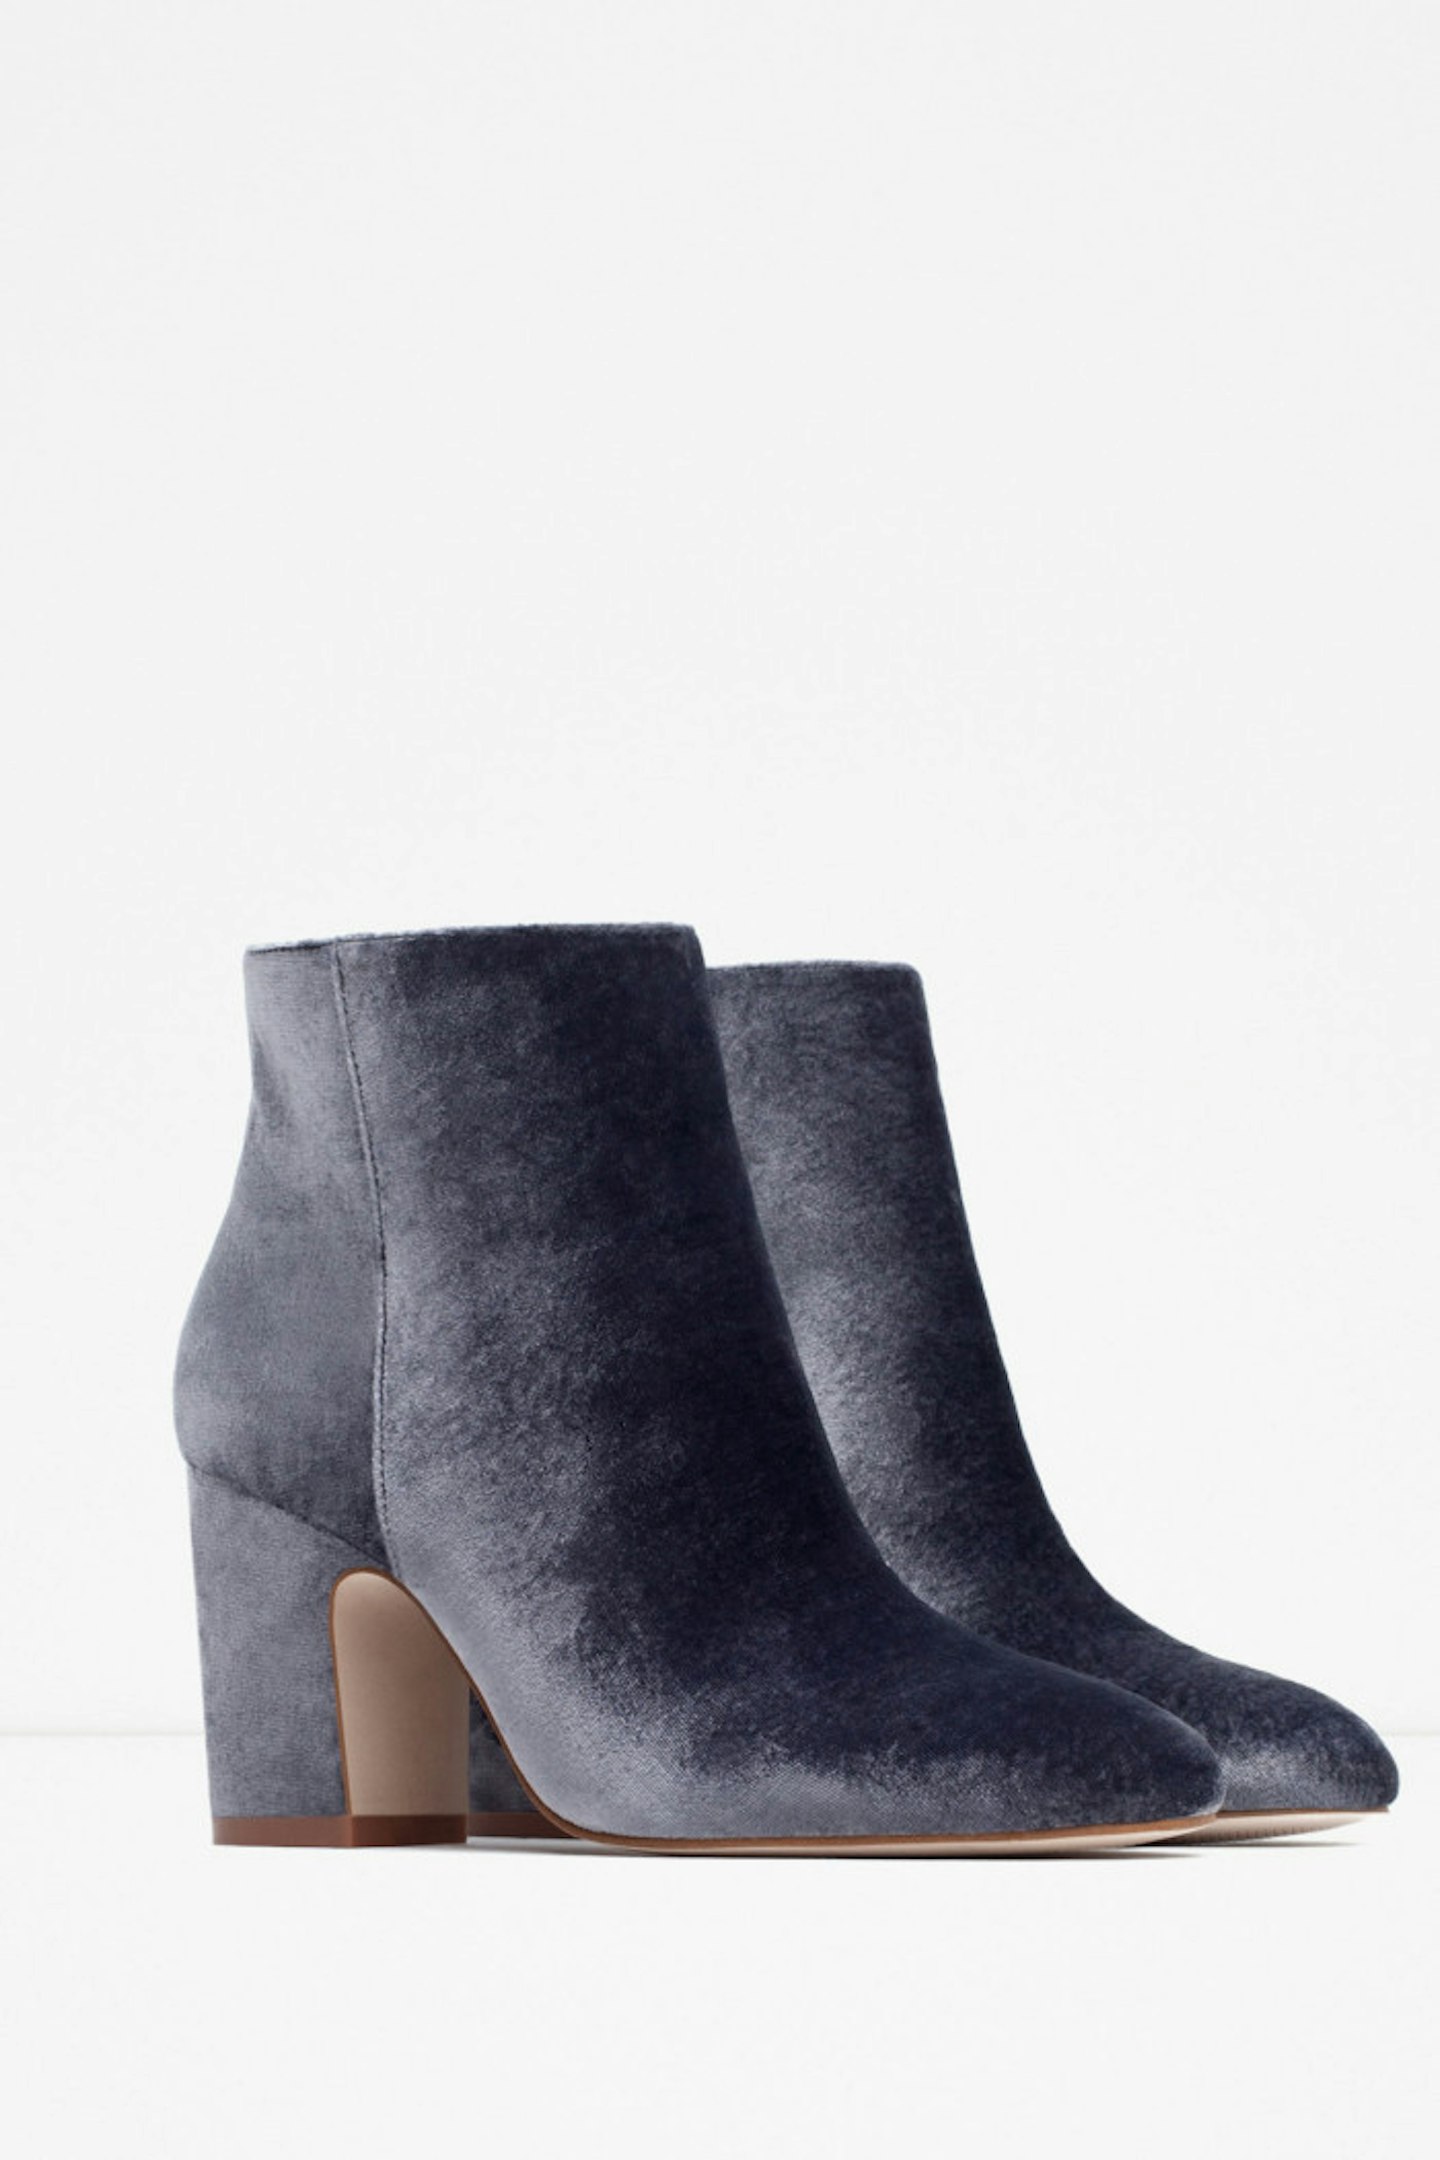 Our shopping wish list is never complete without a little something from high street fave Zara. These ankle boots will take us nicely from Autumn to Winter.